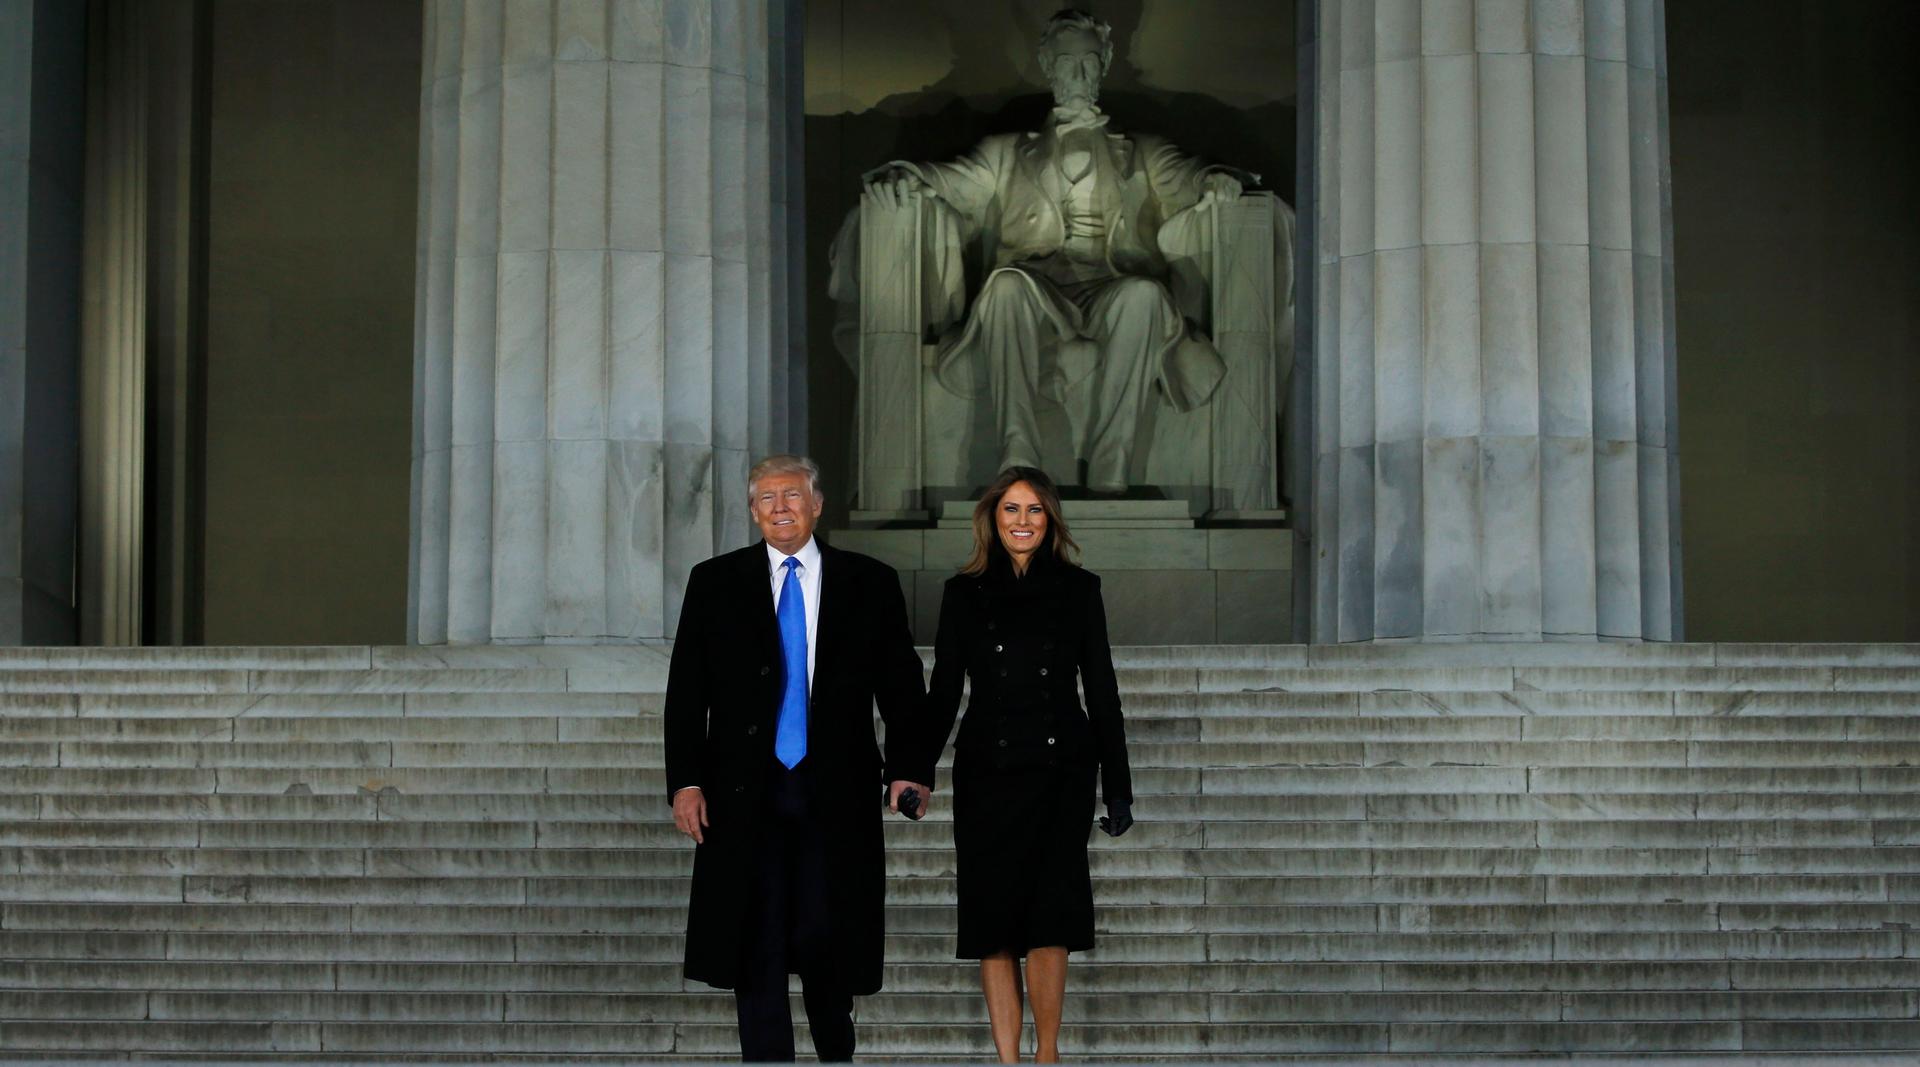 Donald Trump and his wife Melania arriving on the eve of his inauguration, at the "Make America Great Again! Welcome Celebration" at the Lincoln Memorial in Washington, Jan. 19.